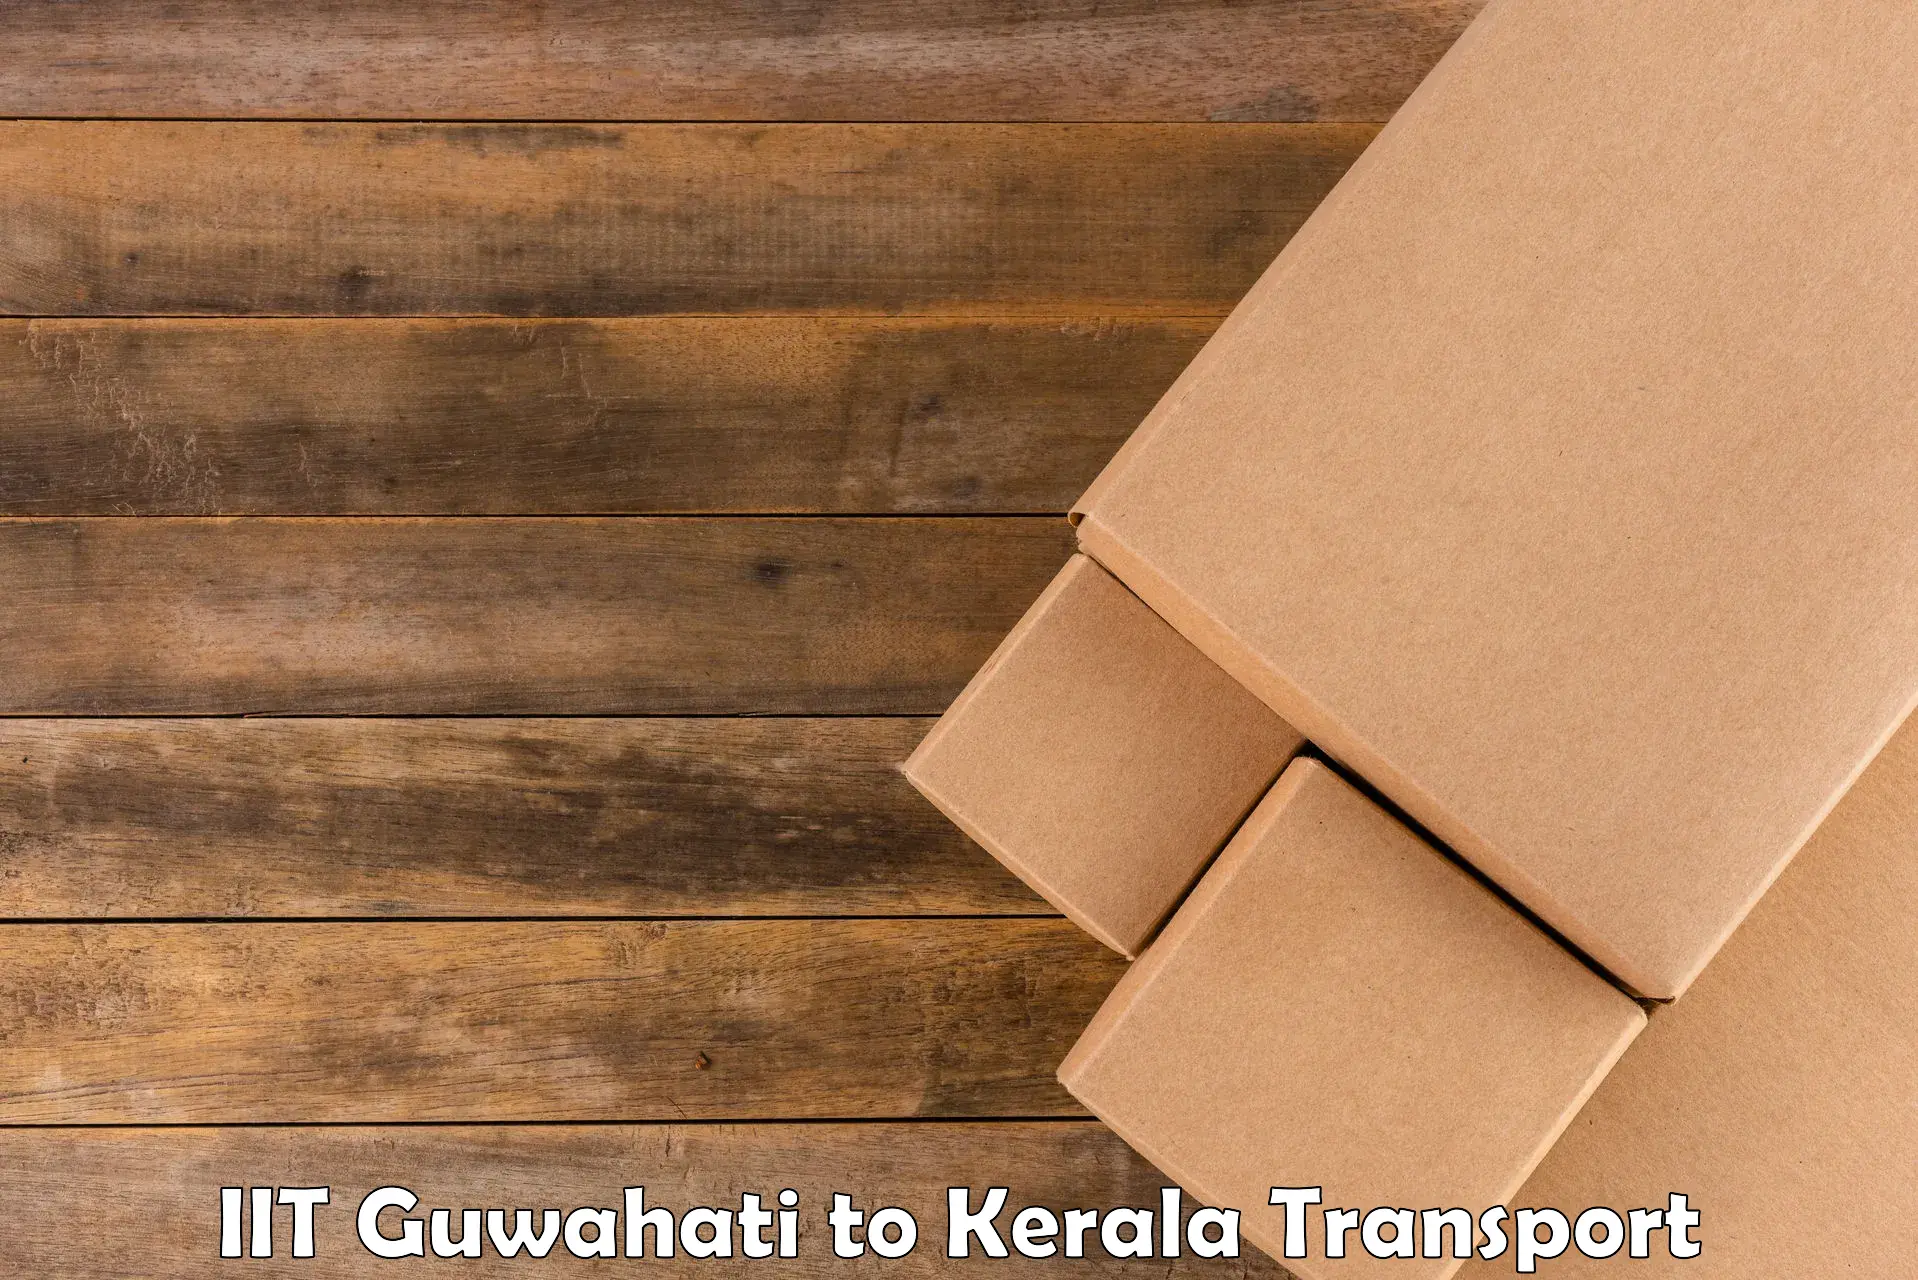 Express transport services IIT Guwahati to Nallepilly